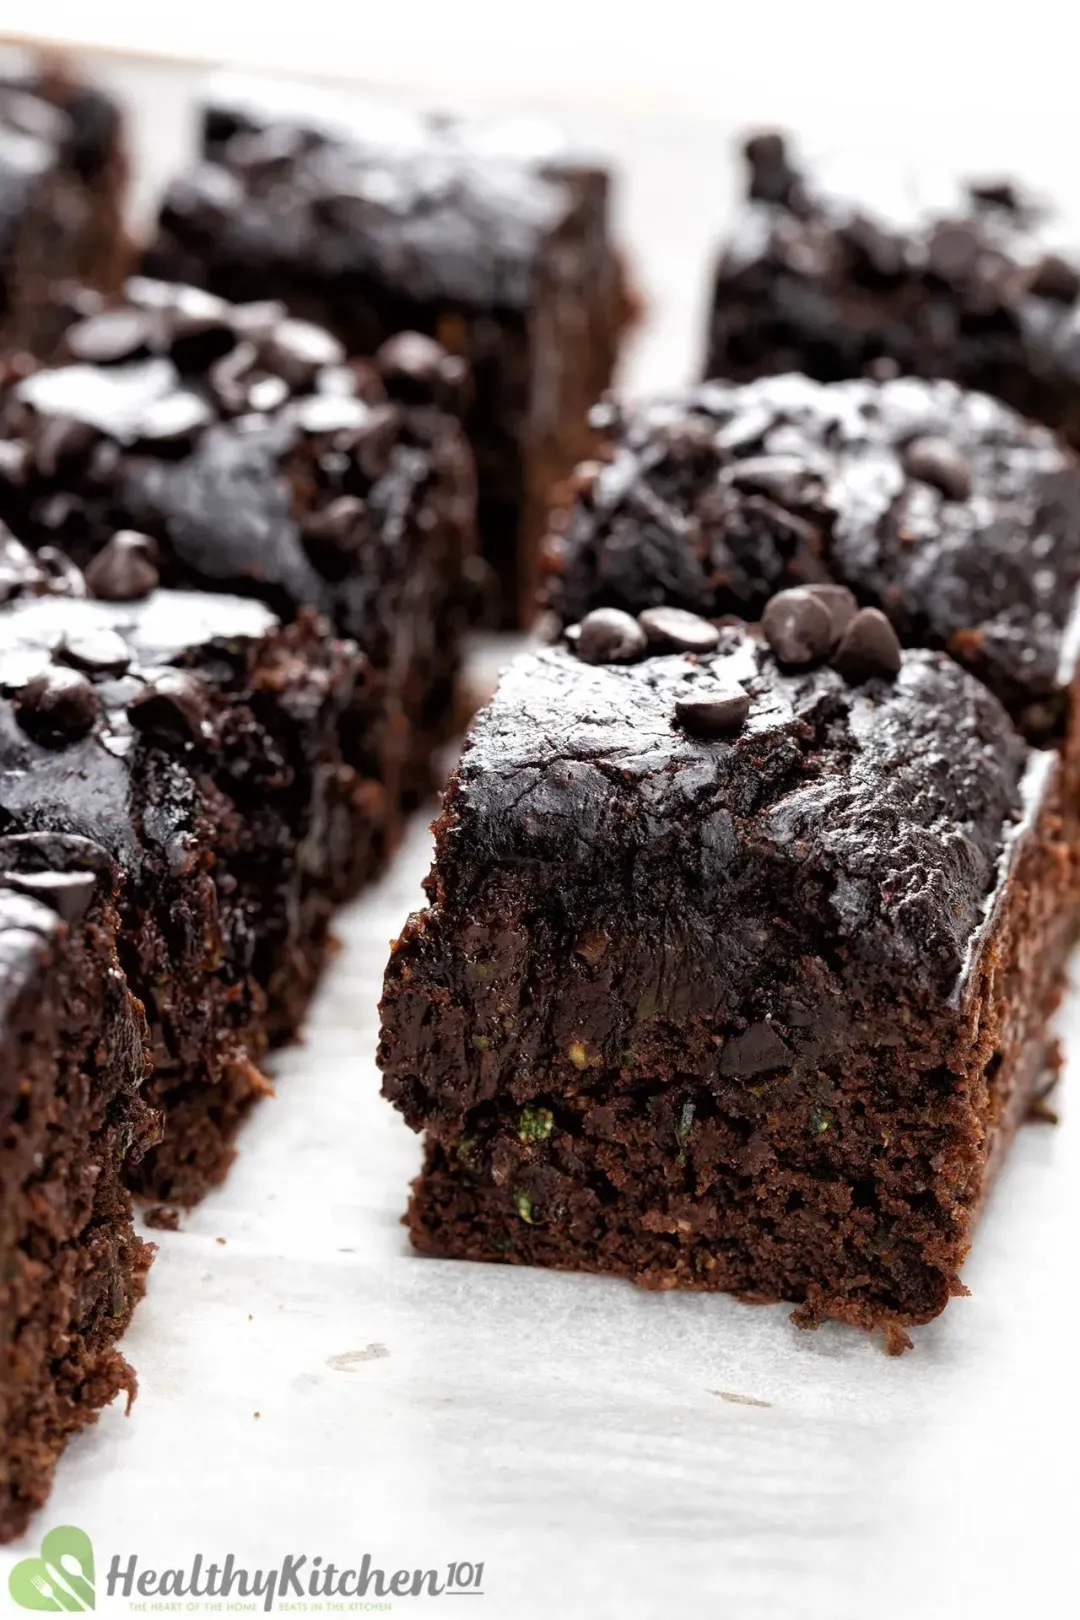 How to Make Homemade Brownies with Zucchini